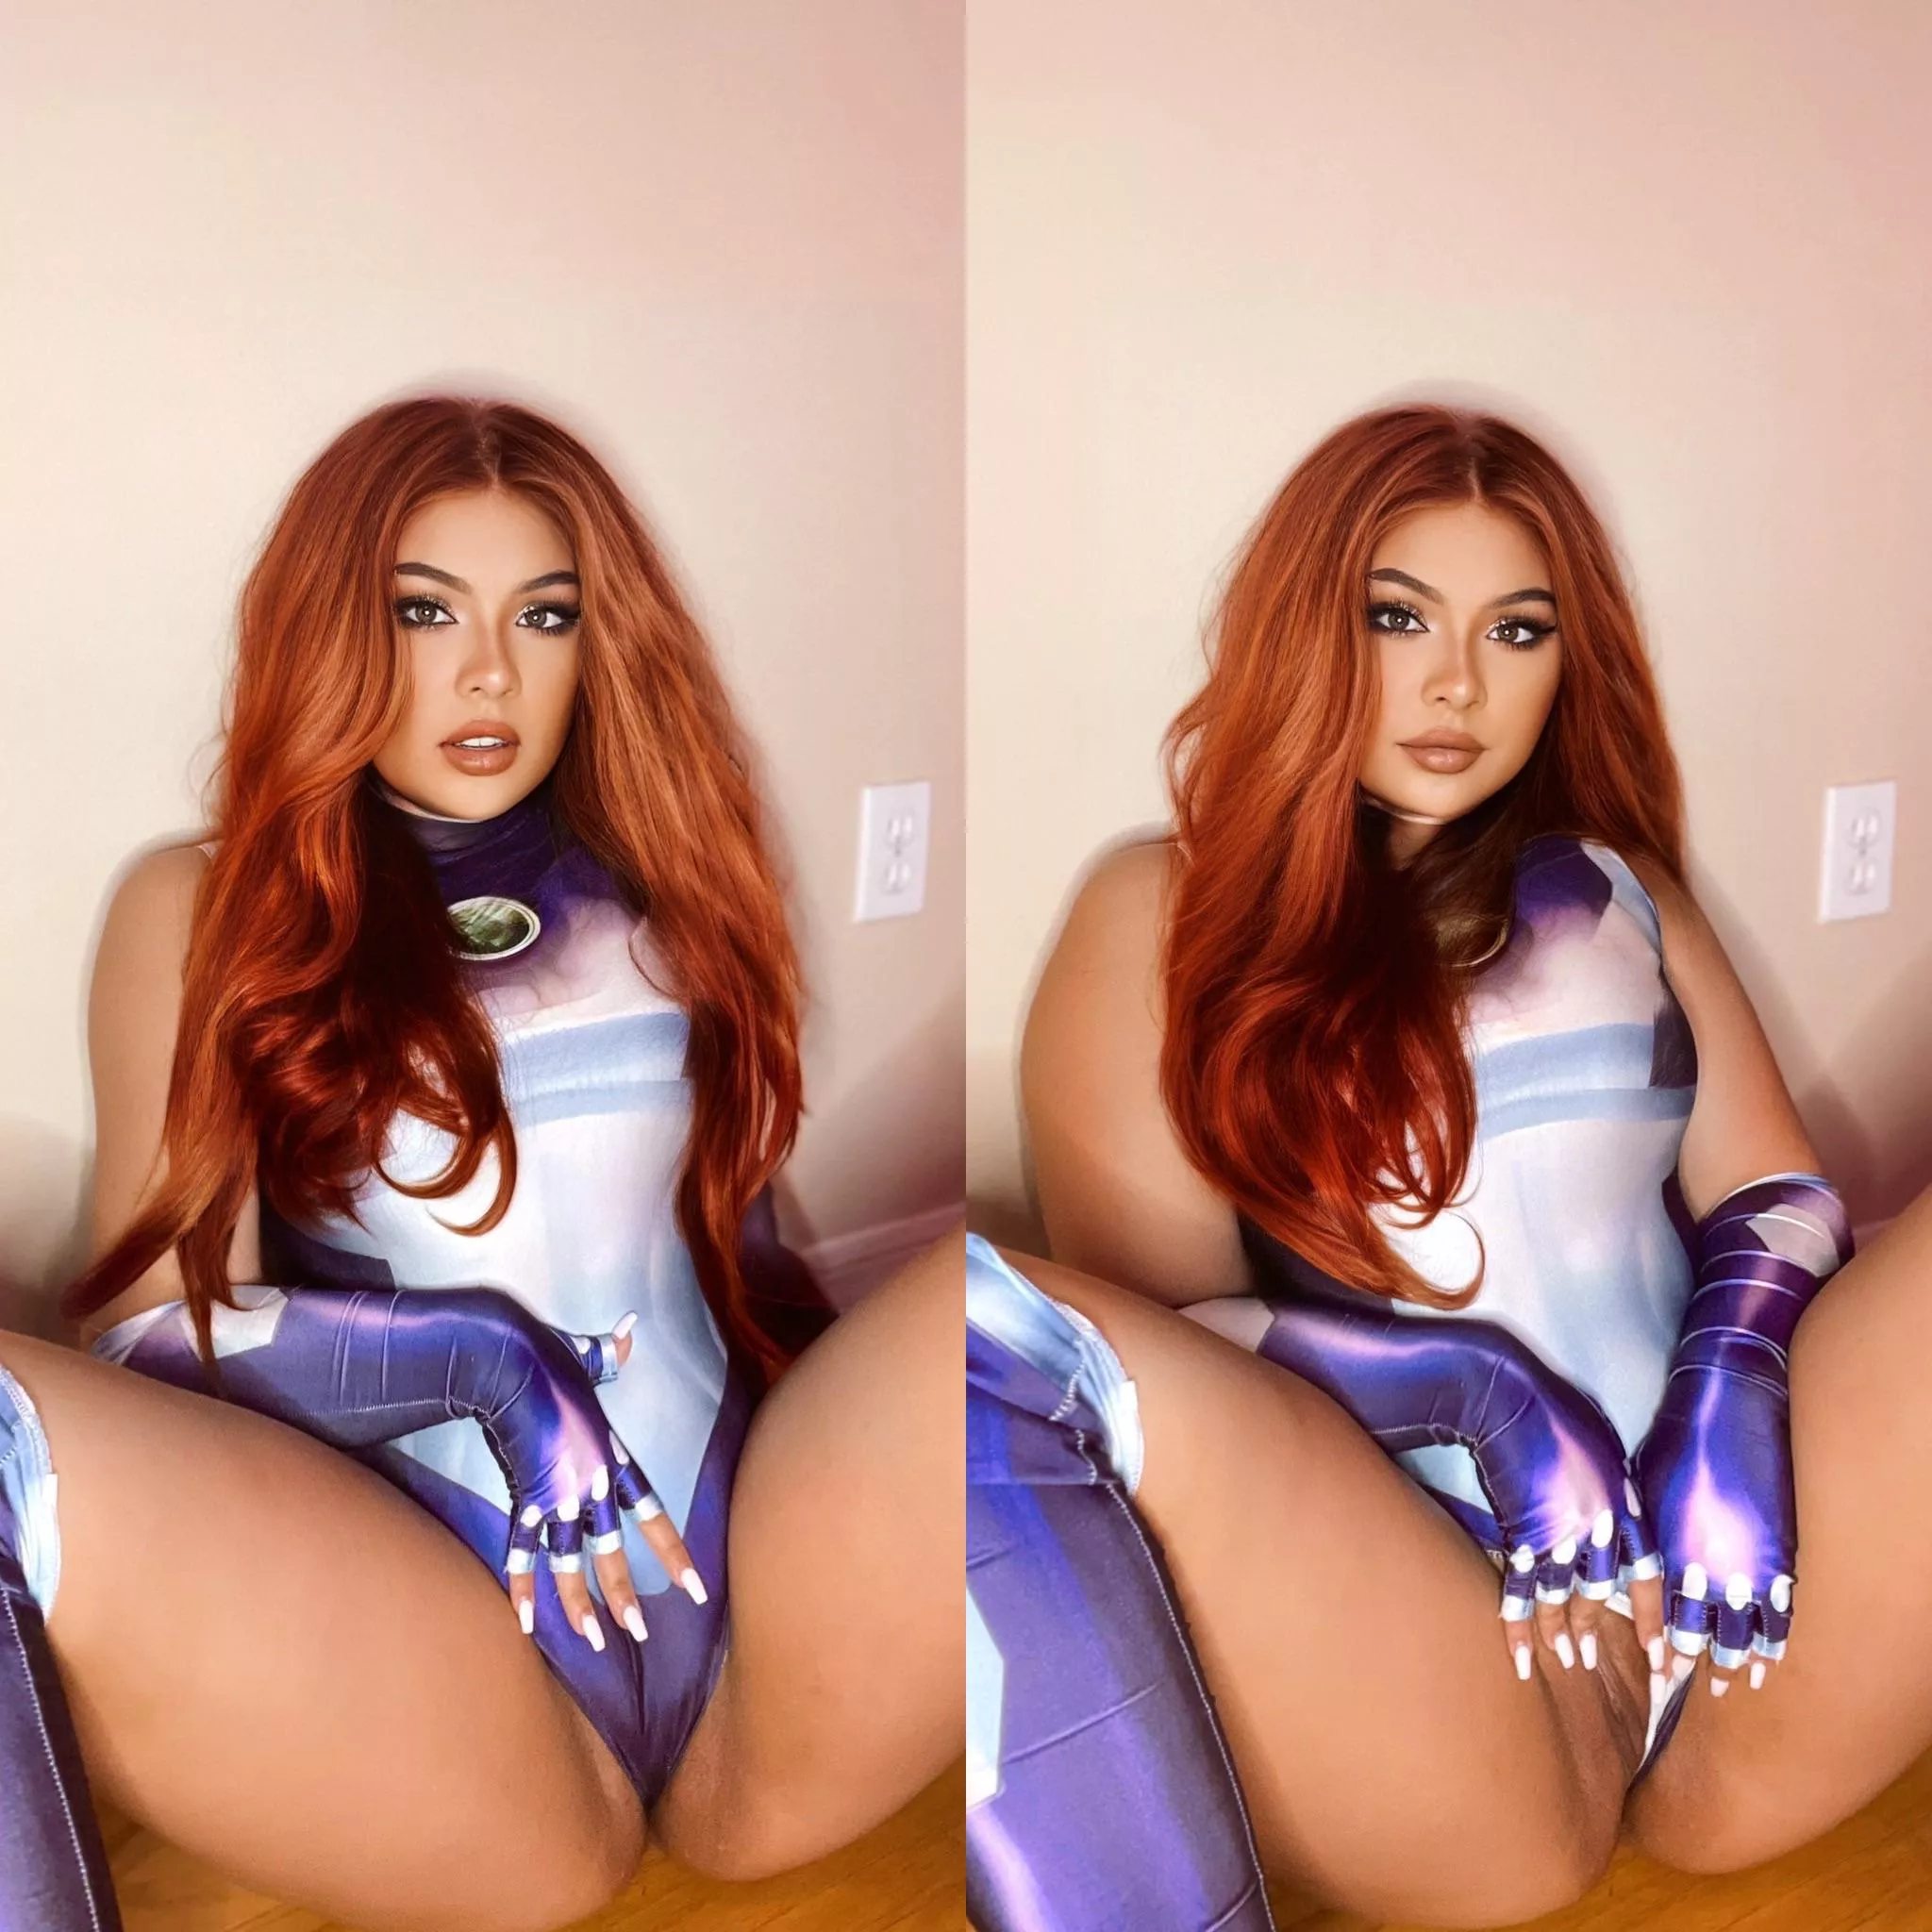 Starfire Cosplay Lesbian Porn - Starfire cosplay by favefilipina me nudes in cosplayonoff | Onlynudes.org